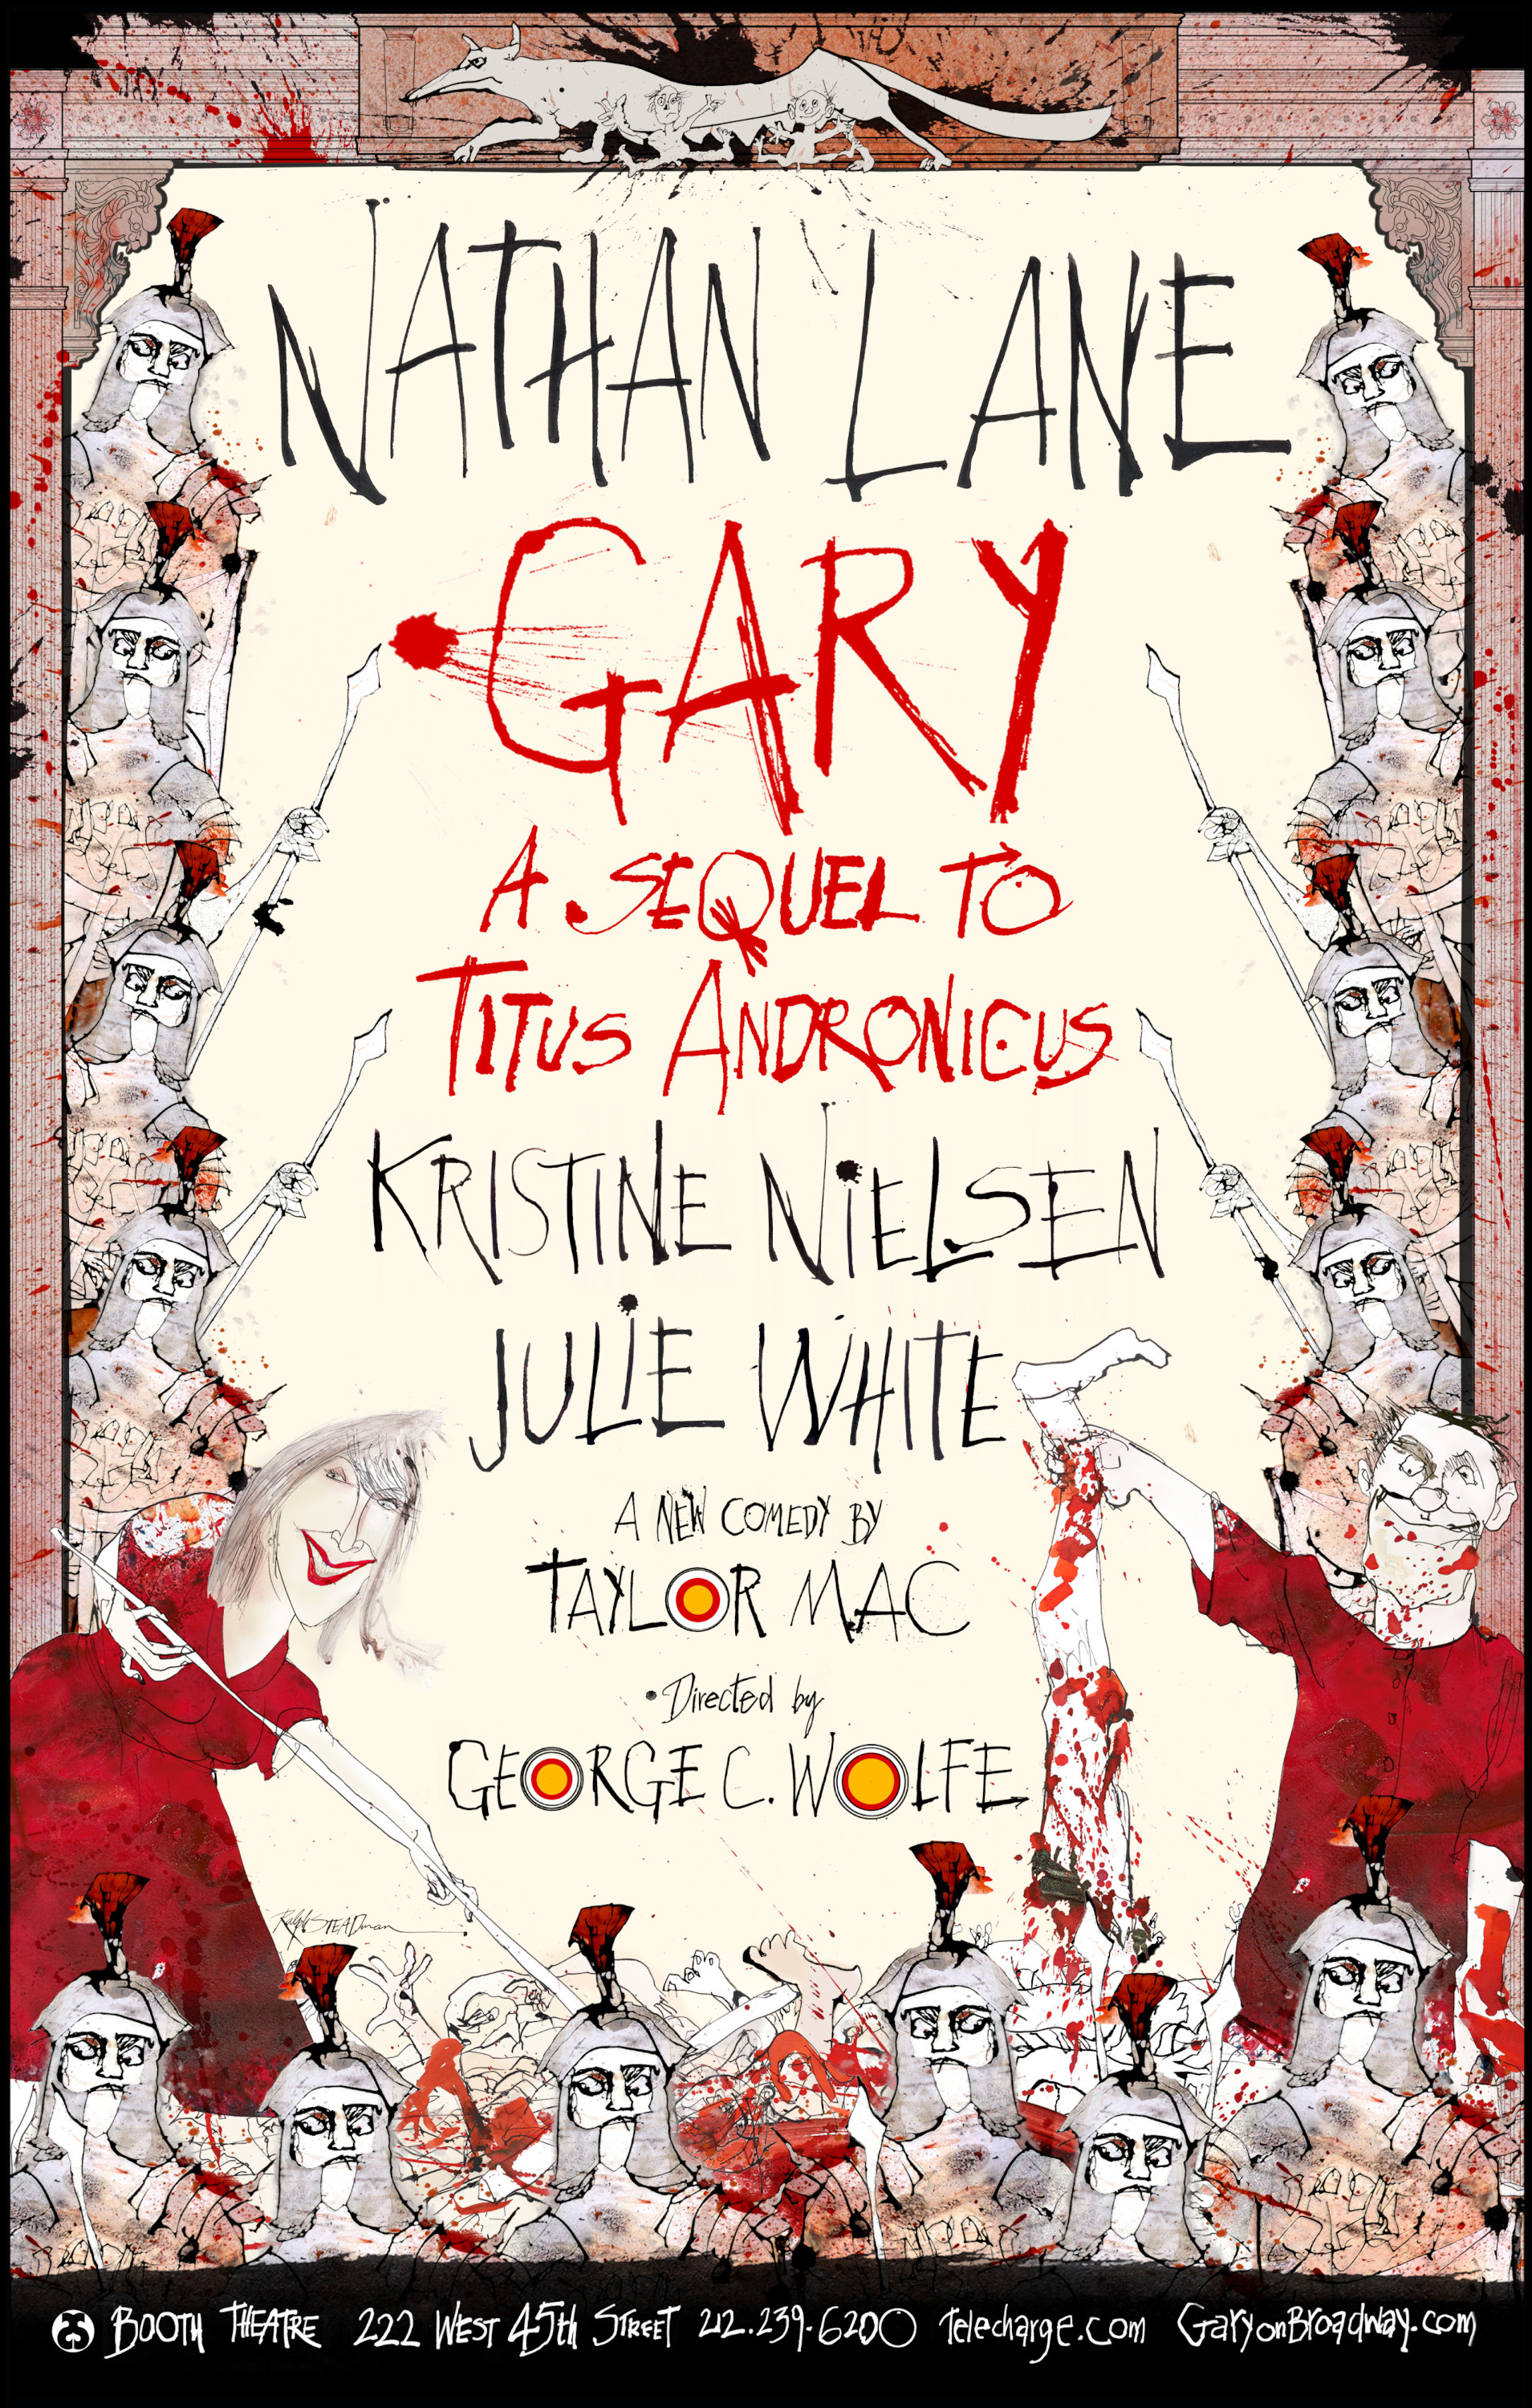 Mega Sized Broadway Poster Image for Gary: A Sequel to Titus Andronicus 